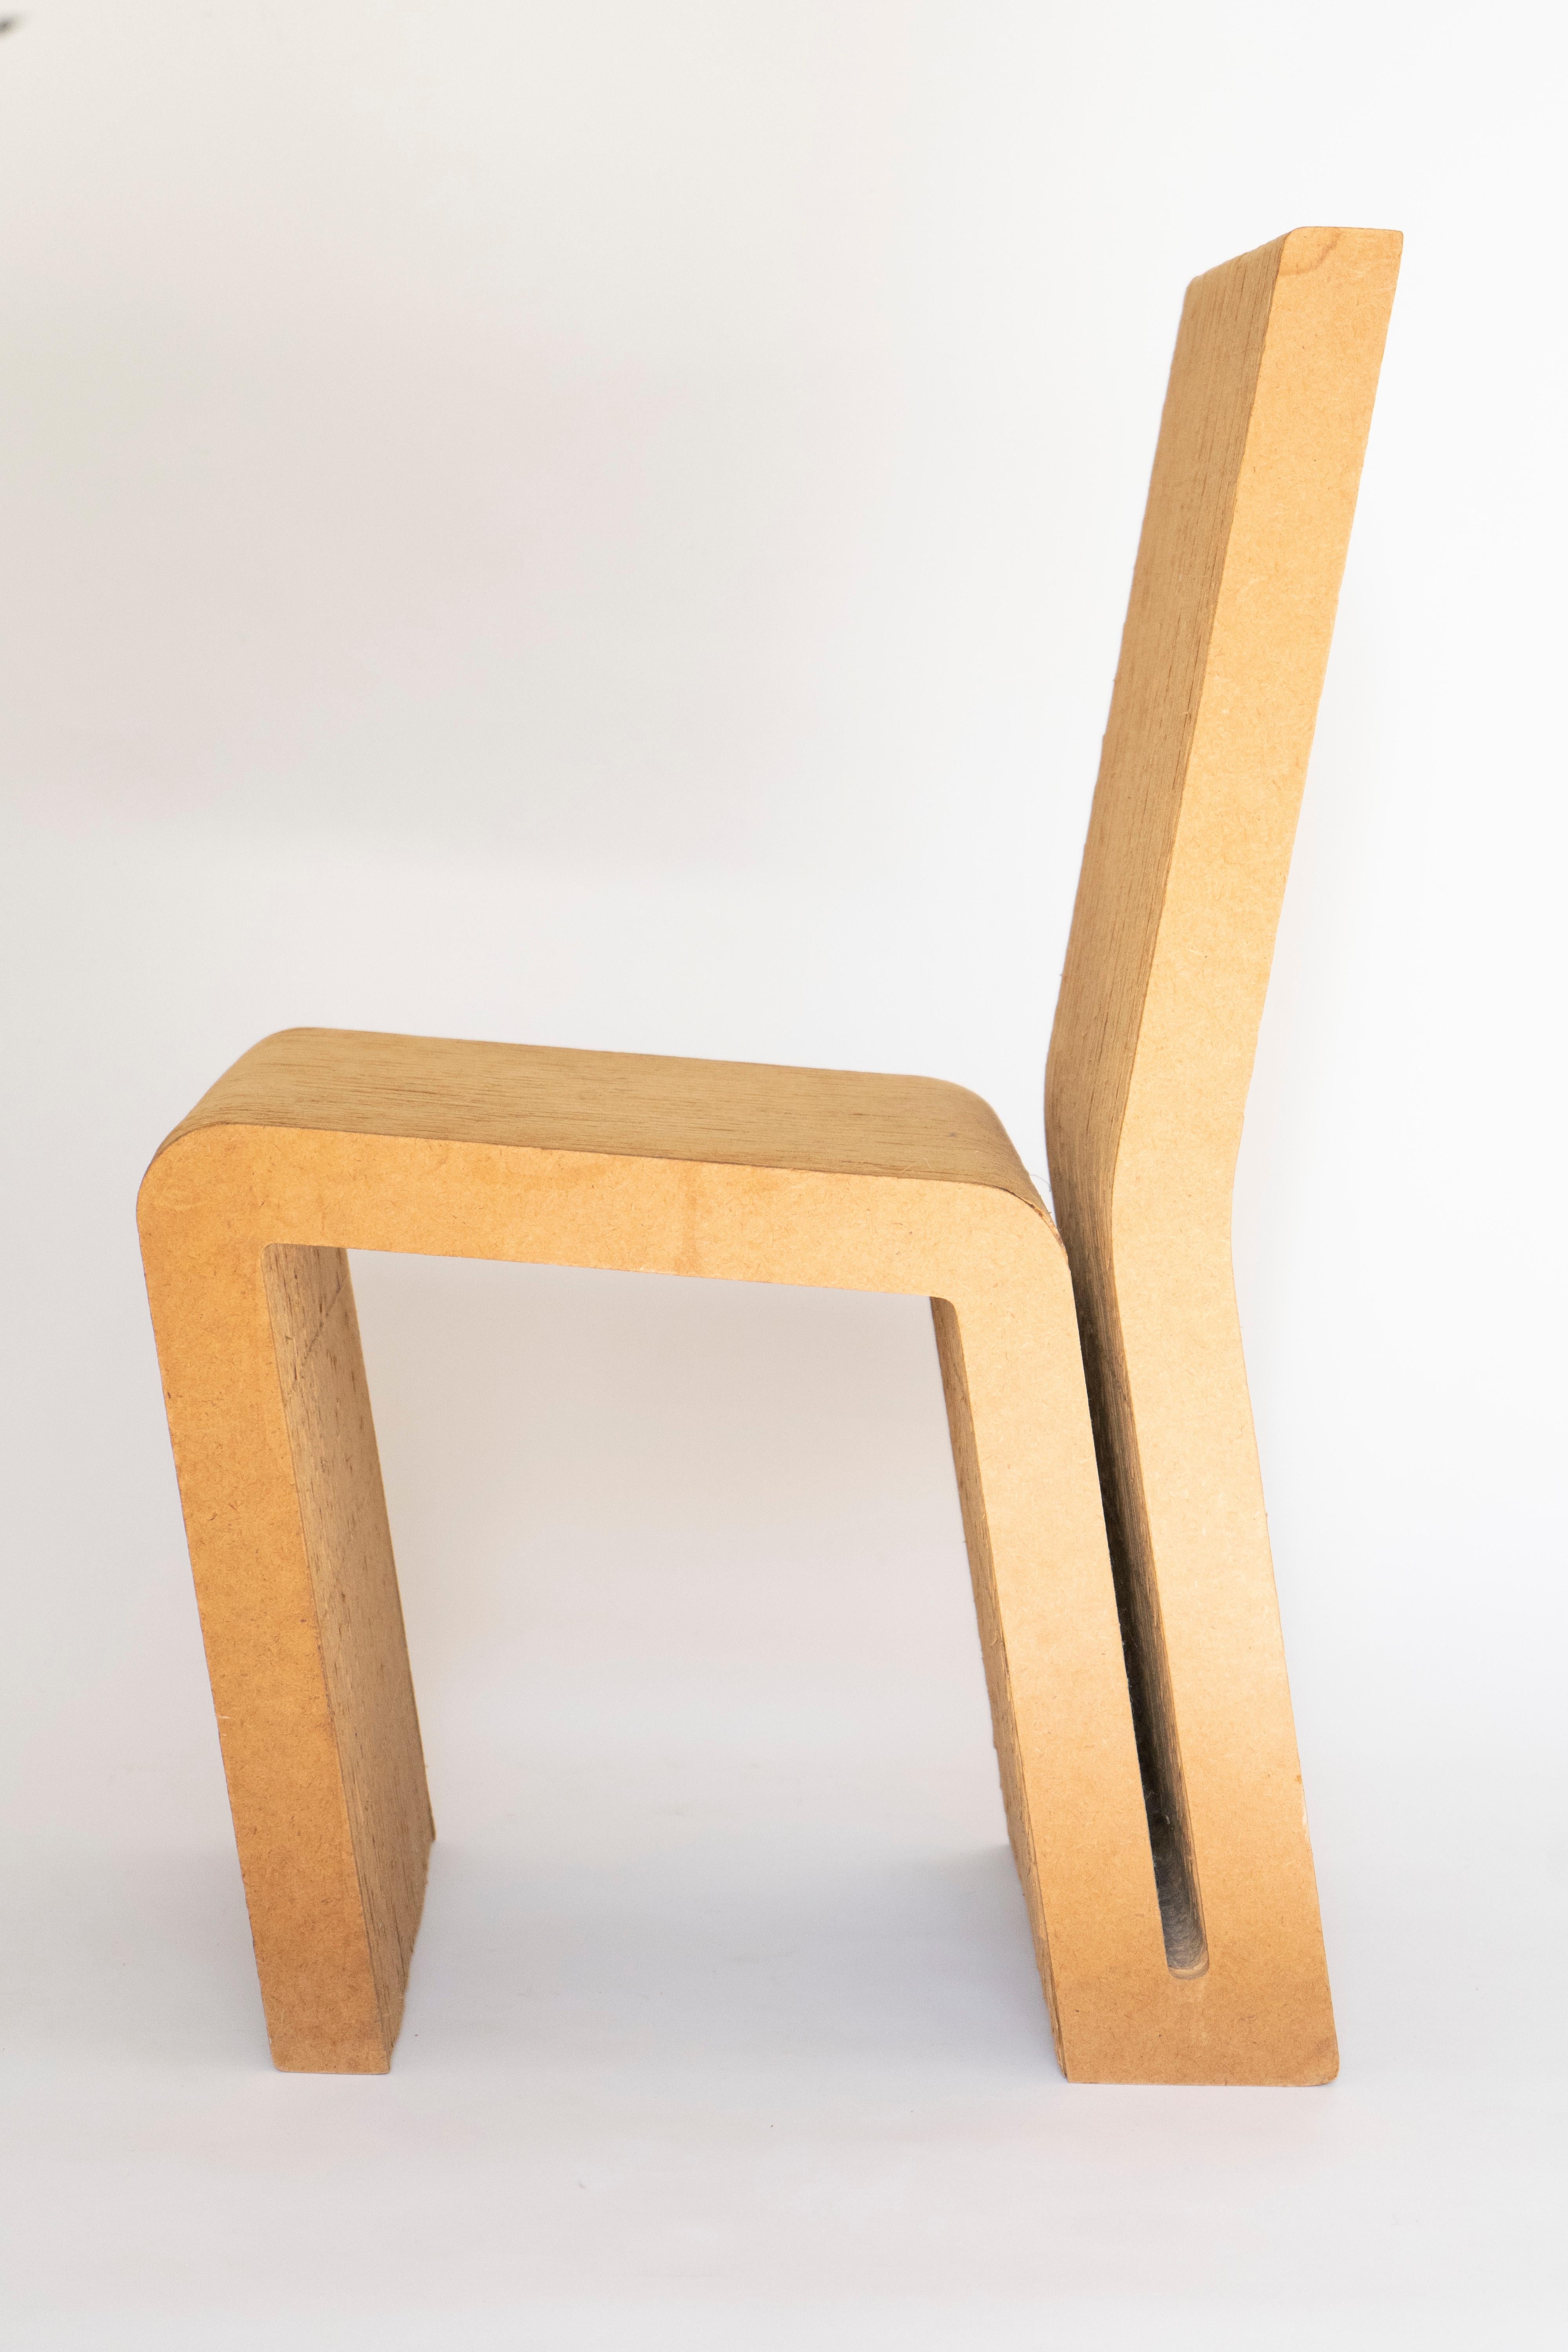 Late 20th Century Easy Edges Cardboard Chair by Frank Gehry, Early 1970s Model For Sale